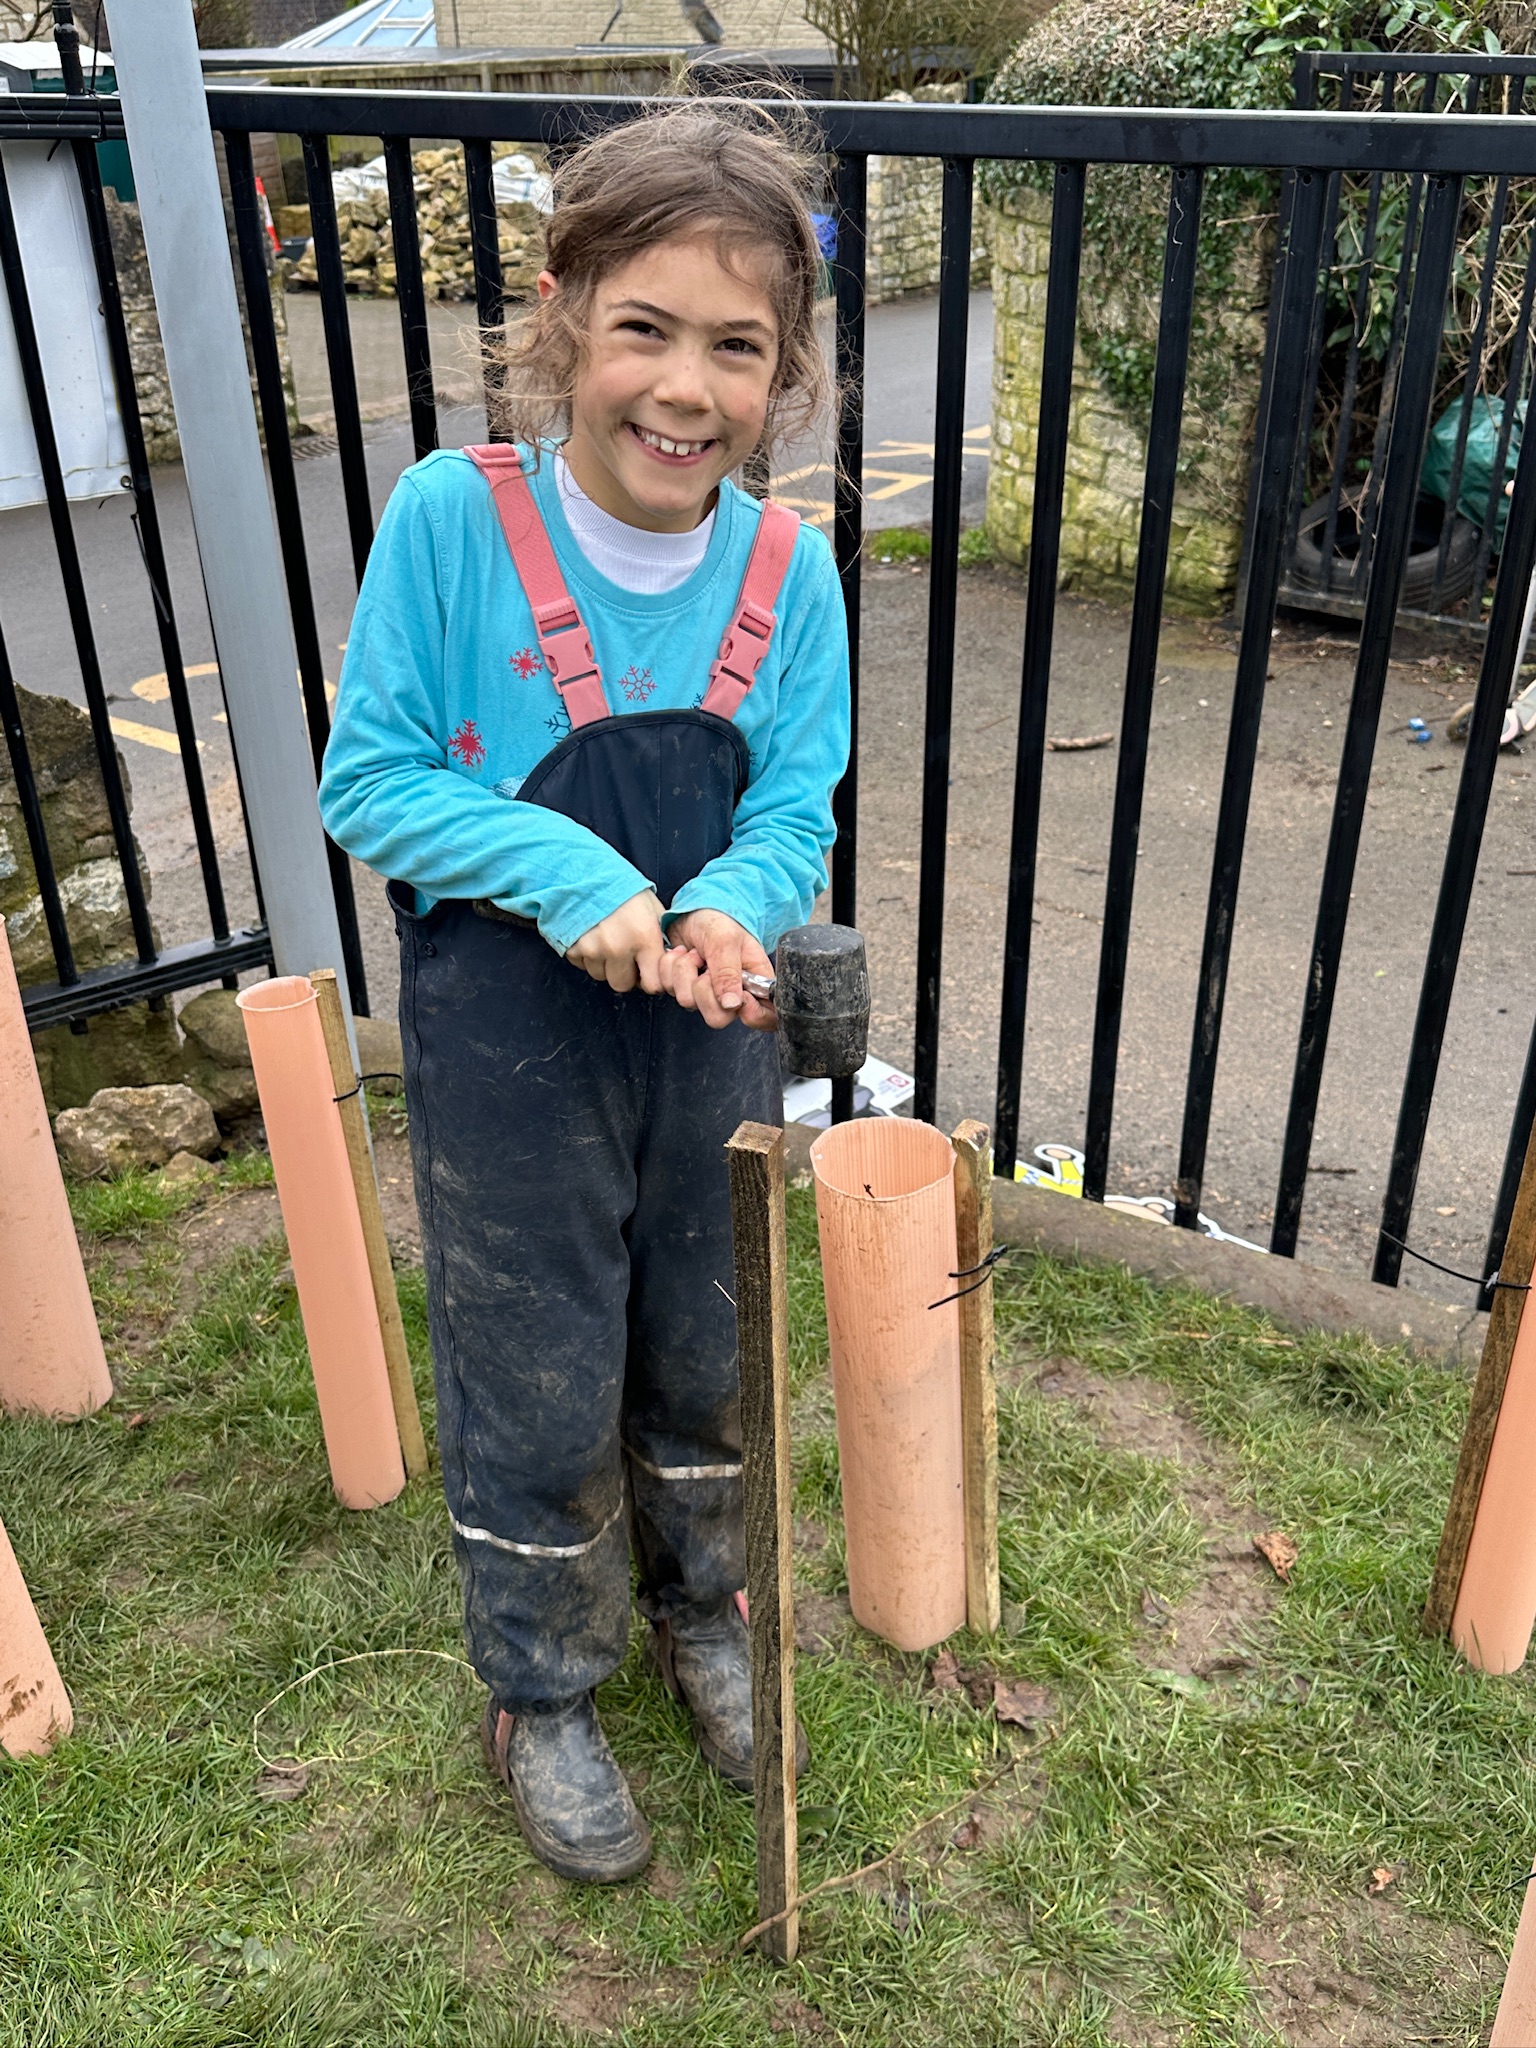 Shoscombe Primary School student and Eco Team member Rosemary Kelly (8) helps to plant a new wildlife hedge at the school. Image Shoscombe School